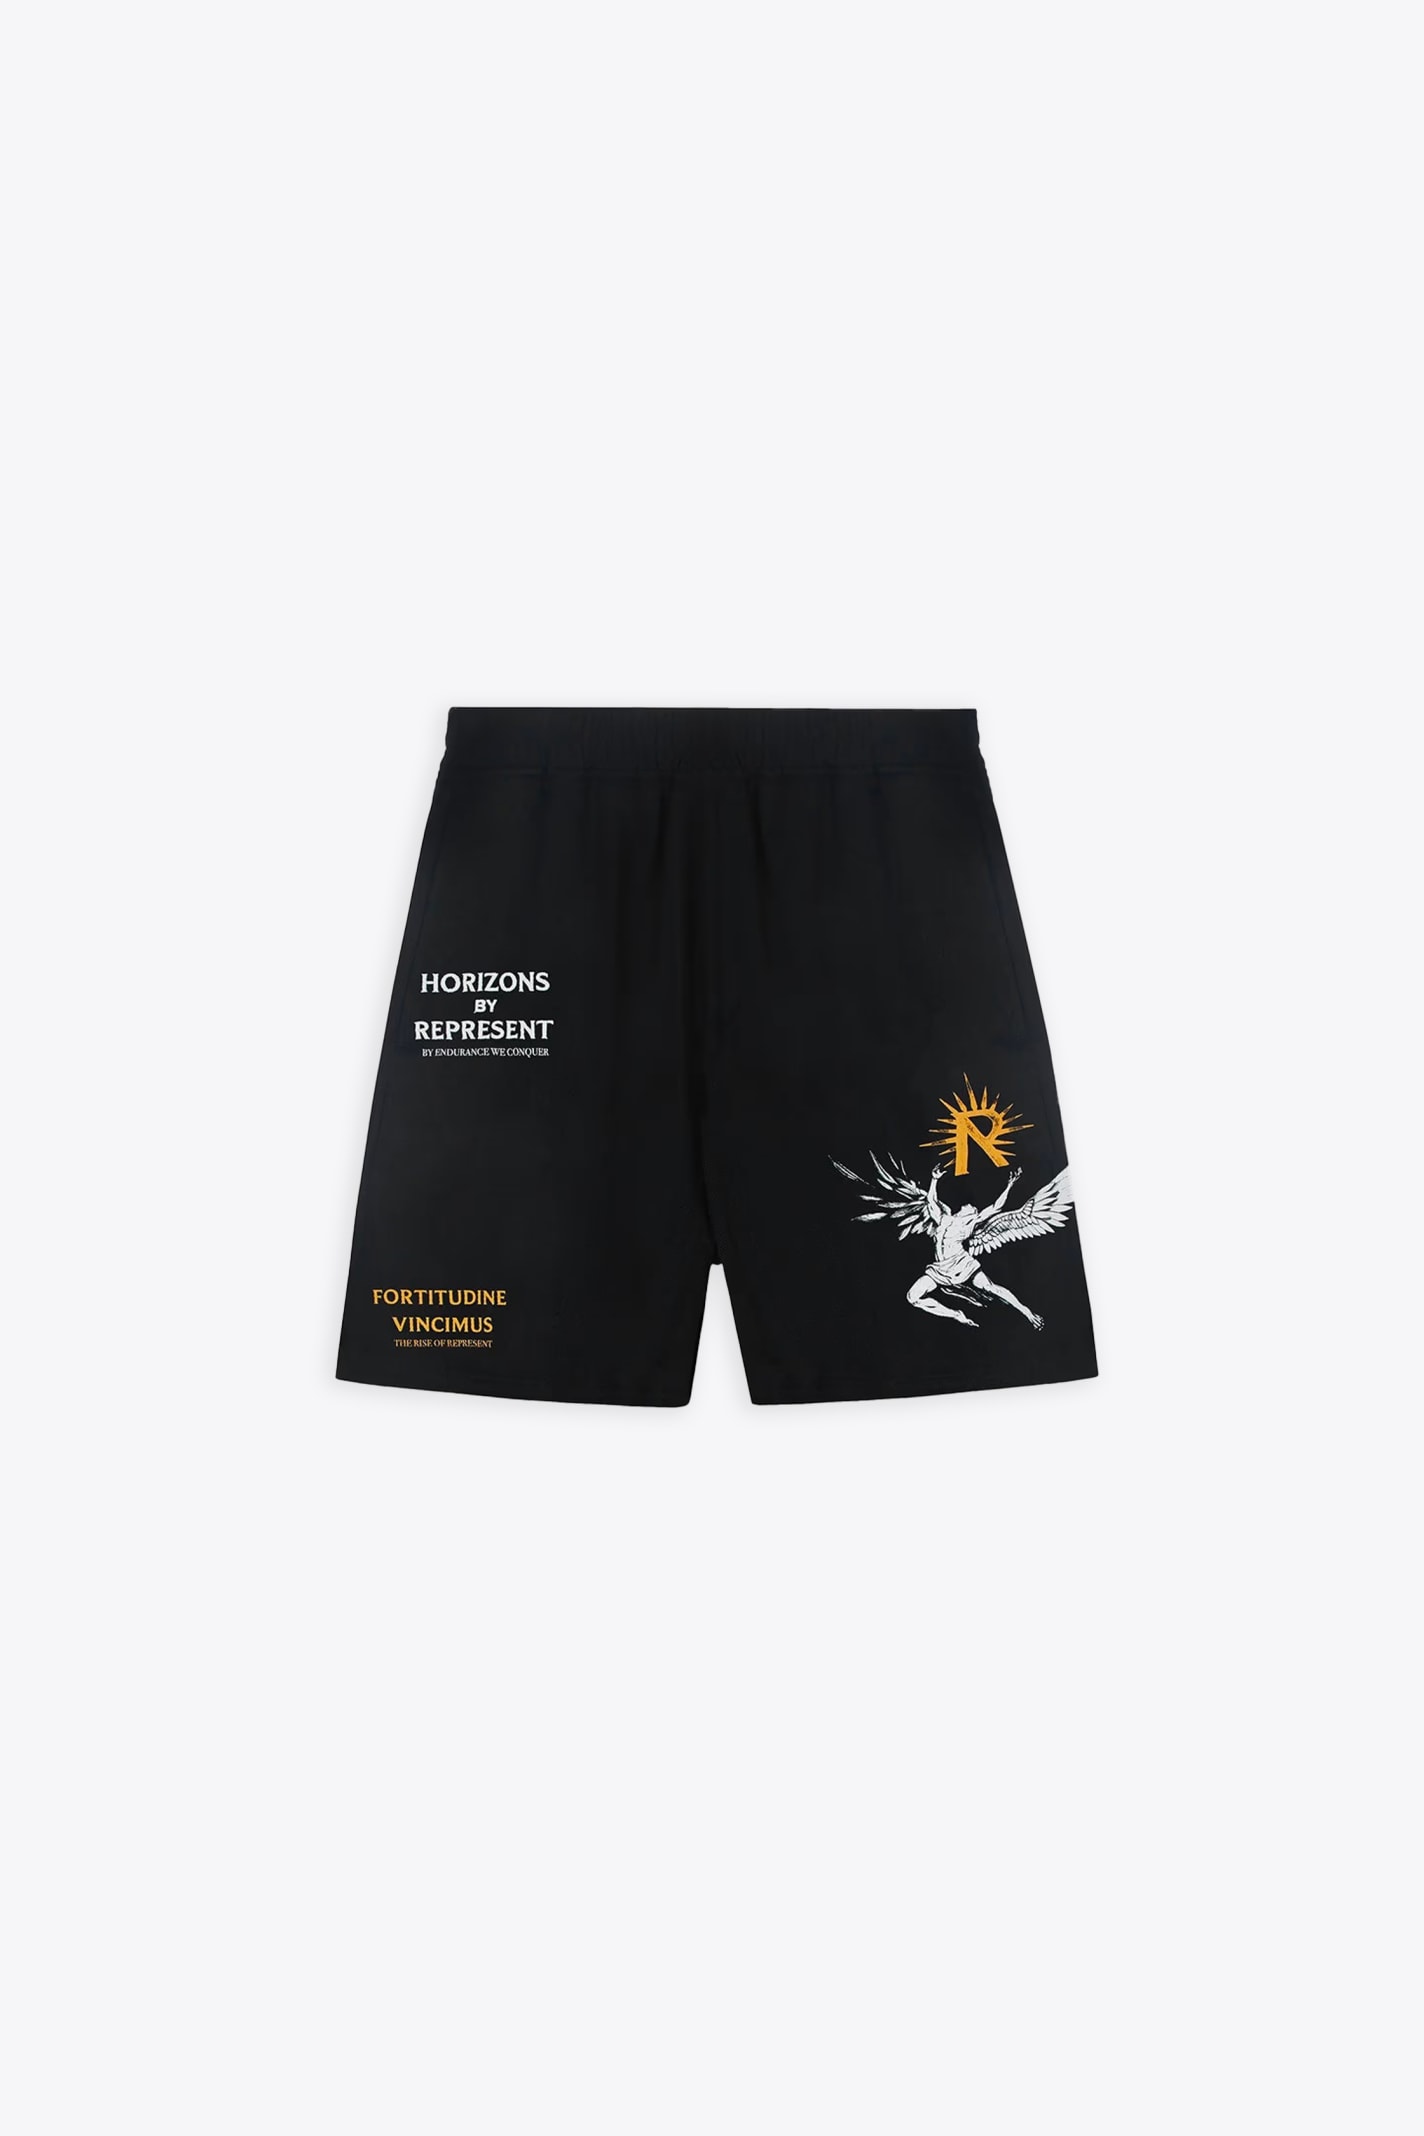 Icarus Short Black lyocell shorts with Icarus graphic print and logo - Icarus Short